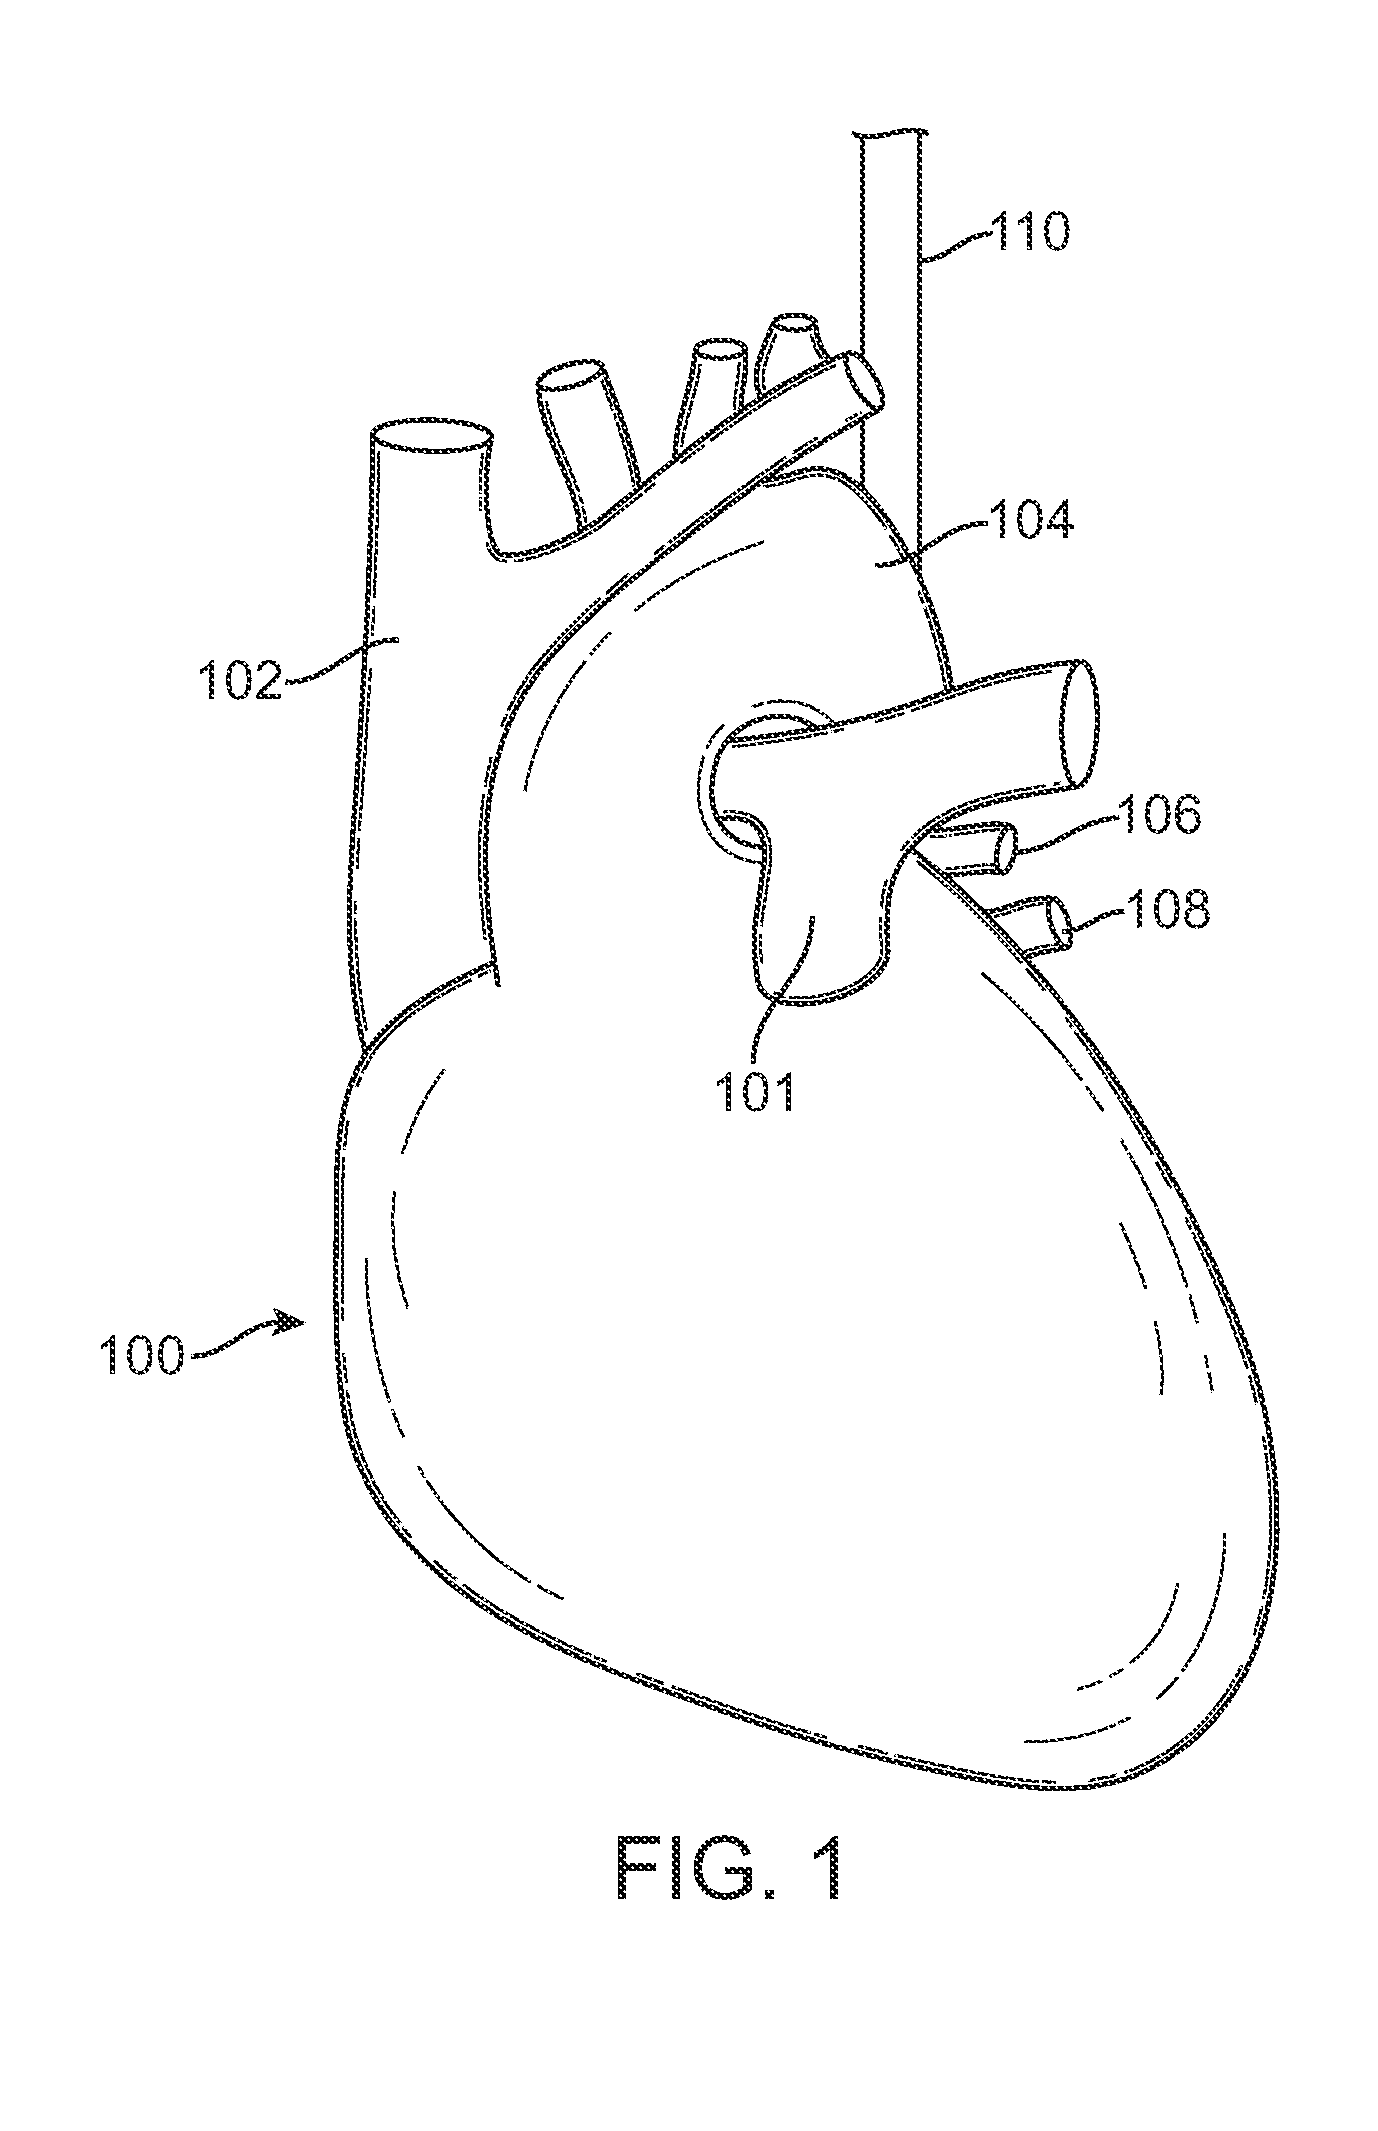 Method to protect the esophagus and other mediastinal structures during cardiac and thoracic interventions